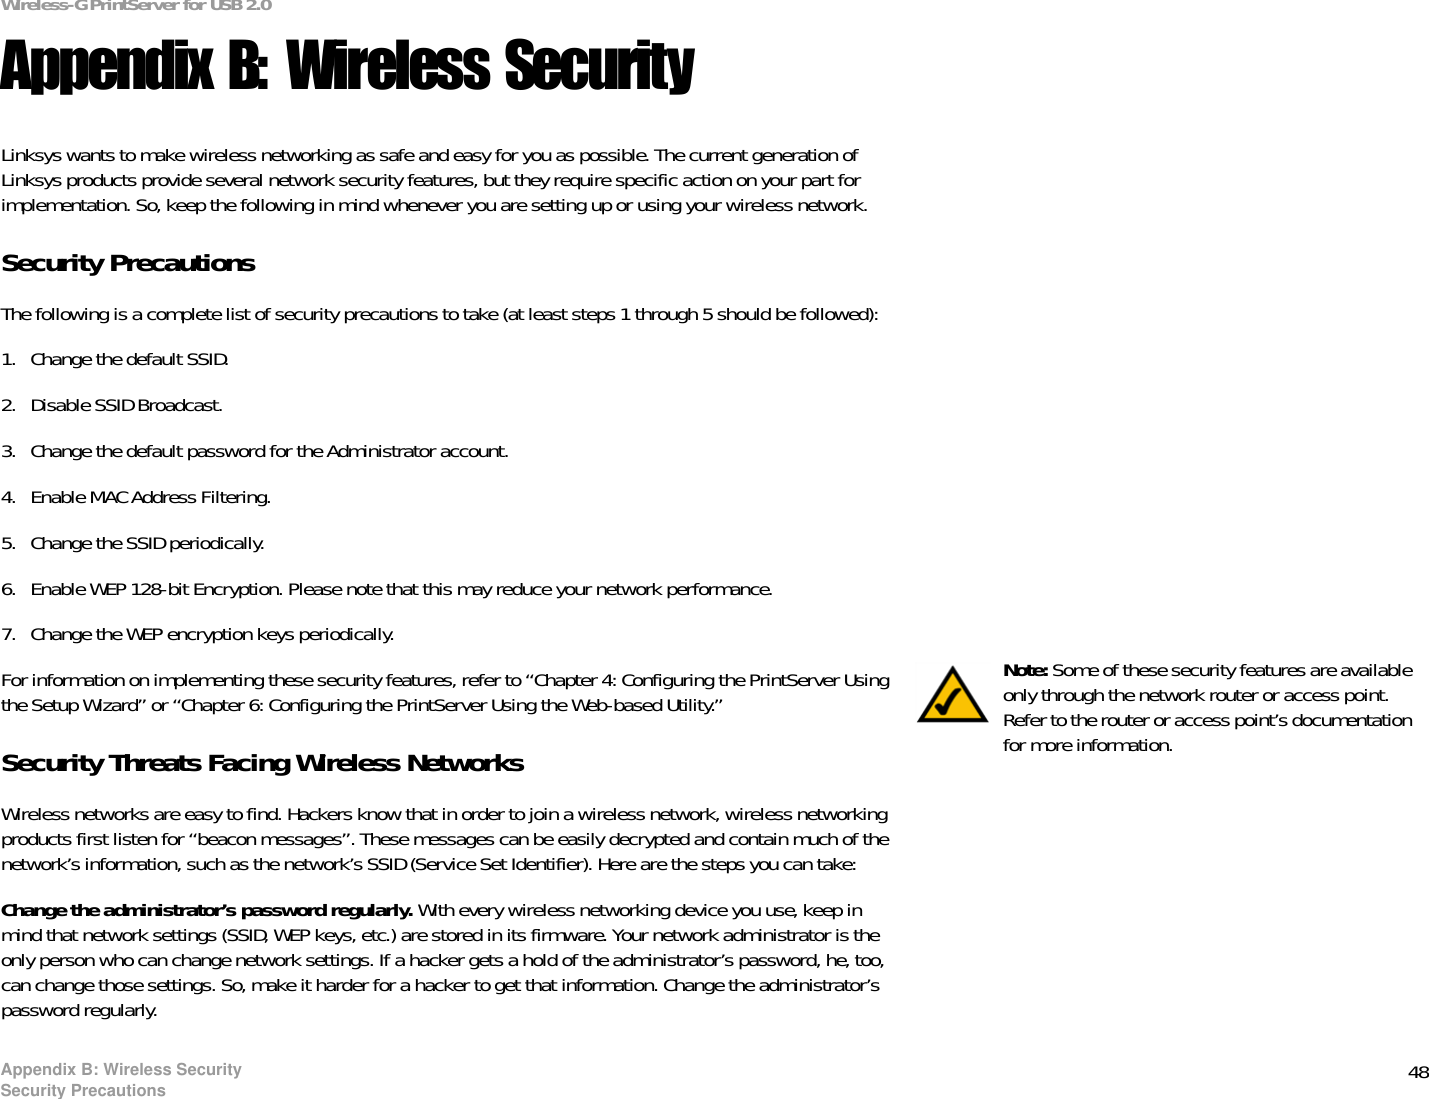 48Appendix B: Wireless SecuritySecurity PrecautionsWireless-G PrintServer for USB 2.0Appendix B: Wireless SecurityLinksys wants to make wireless networking as safe and easy for you as possible. The current generation of Linksys products provide several network security features, but they require specific action on your part for implementation. So, keep the following in mind whenever you are setting up or using your wireless network.Security PrecautionsThe following is a complete list of security precautions to take (at least steps 1 through 5 should be followed):1. Change the default SSID. 2. Disable SSID Broadcast. 3. Change the default password for the Administrator account. 4. Enable MAC Address Filtering. 5. Change the SSID periodically. 6. Enable WEP 128-bit Encryption. Please note that this may reduce your network performance. 7. Change the WEP encryption keys periodically. For information on implementing these security features, refer to “Chapter 4: Configuring the PrintServer Using the Setup Wizard” or “Chapter 6: Configuring the PrintServer Using the Web-based Utility.”Security Threats Facing Wireless Networks Wireless networks are easy to find. Hackers know that in order to join a wireless network, wireless networking products first listen for “beacon messages”. These messages can be easily decrypted and contain much of the network’s information, such as the network’s SSID (Service Set Identifier). Here are the steps you can take:Change the administrator’s password regularly. With every wireless networking device you use, keep in mind that network settings (SSID, WEP keys, etc.) are stored in its firmware. Your network administrator is the only person who can change network settings. If a hacker gets a hold of the administrator’s password, he, too, can change those settings. So, make it harder for a hacker to get that information. Change the administrator’s password regularly.Note: Some of these security features are available only through the network router or access point. Refer to the router or access point’s documentation for more information.